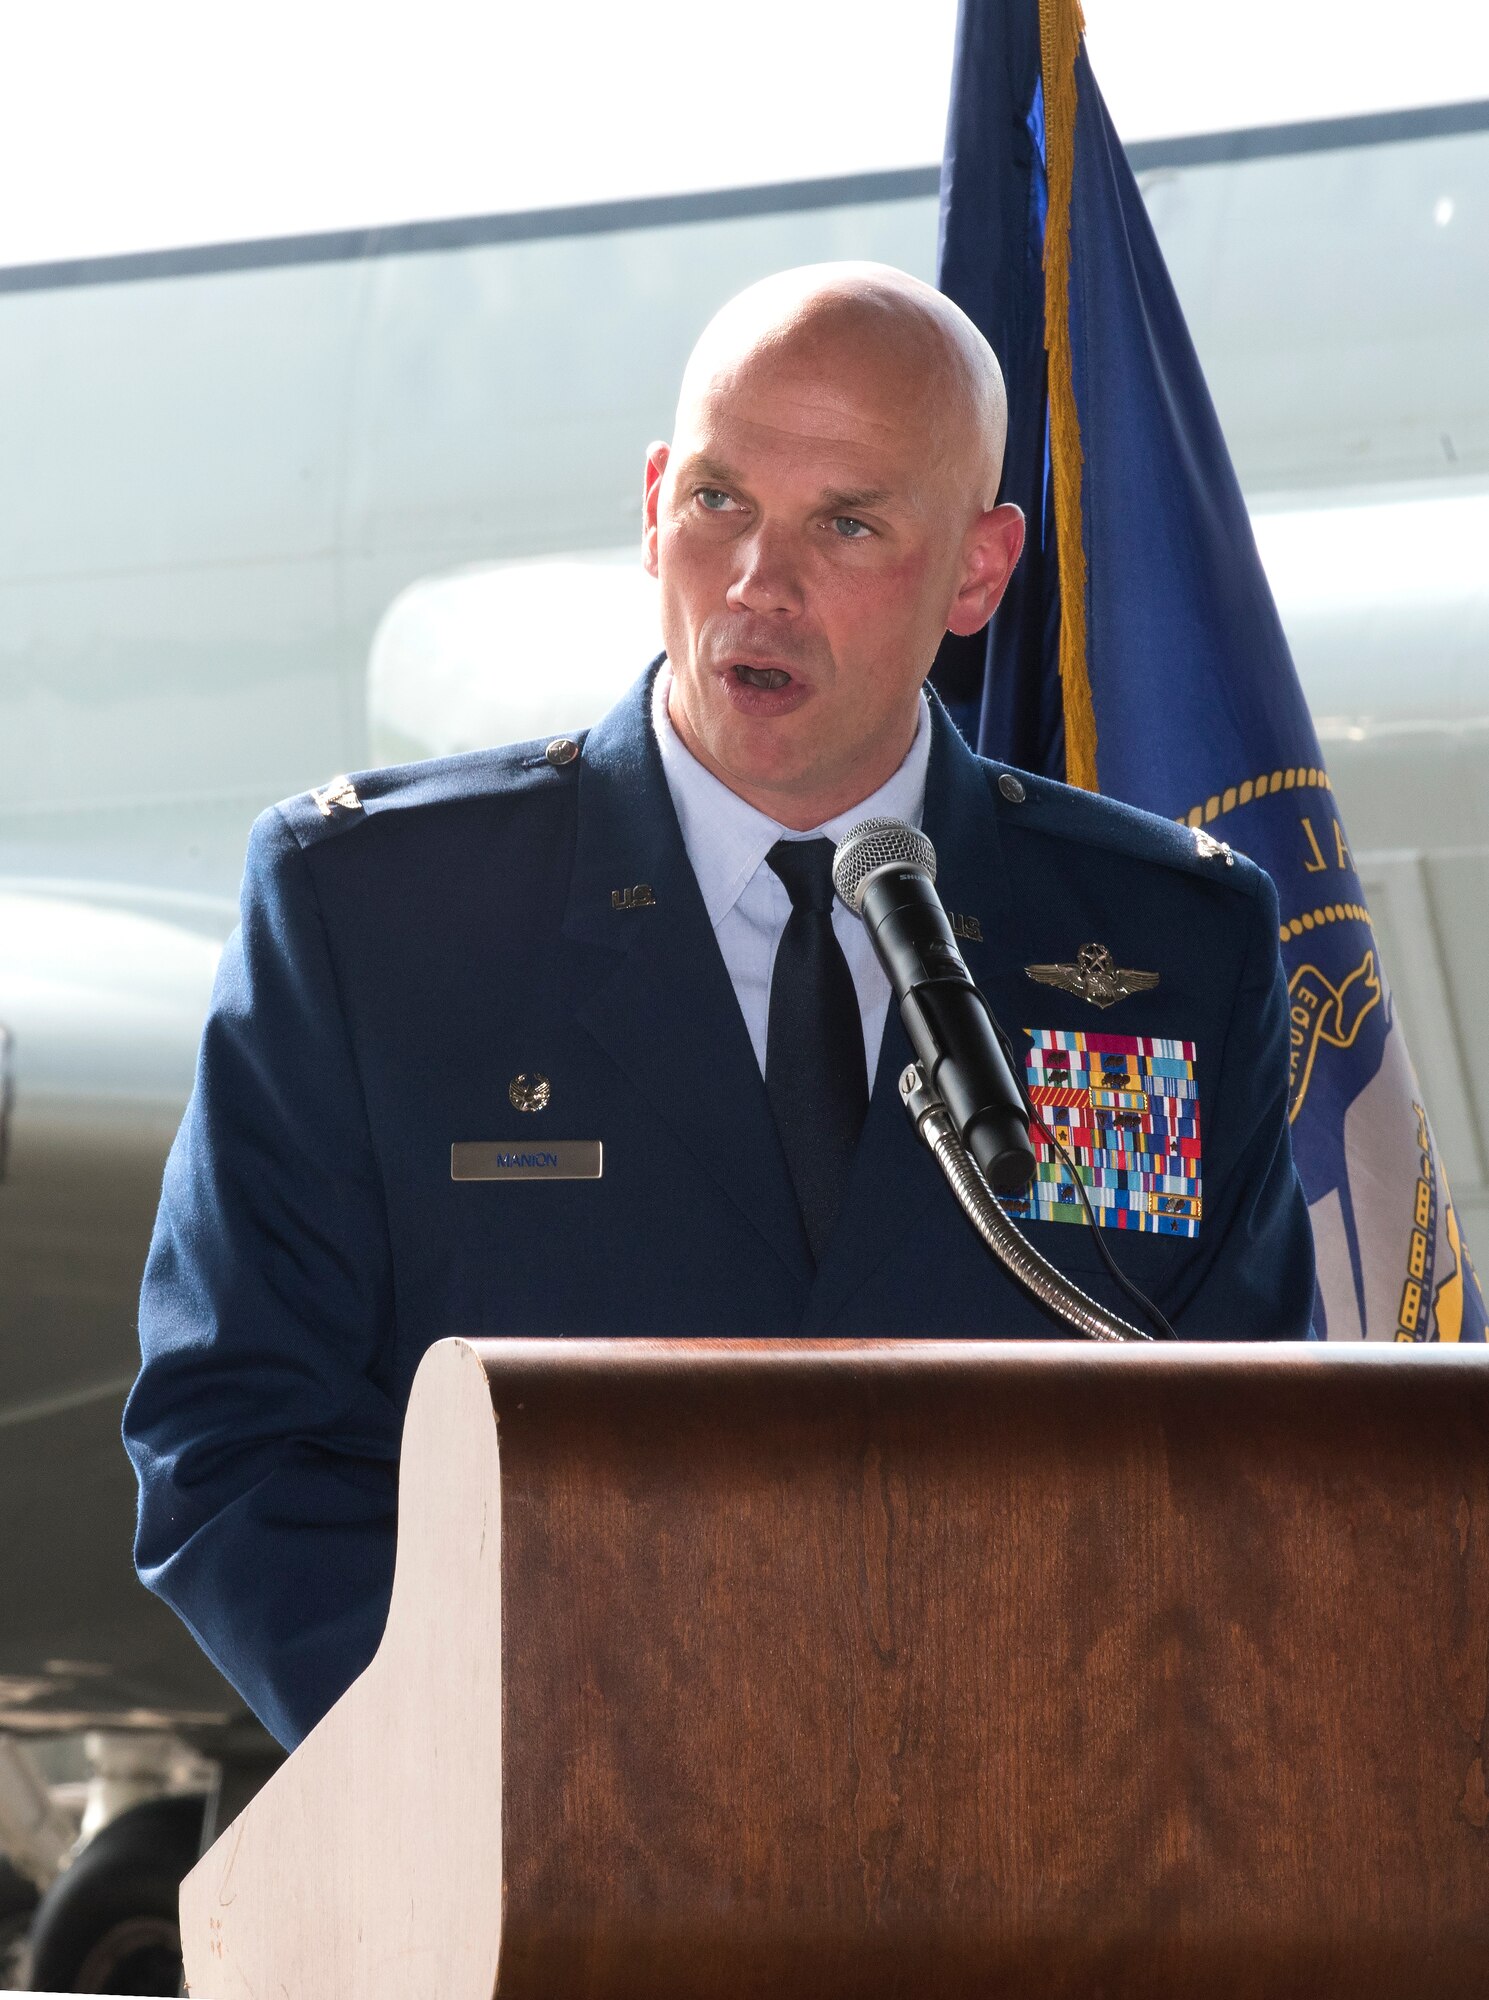 Col. Michael Manion, 55th Wing commander, provides remarks August 28, 2018 inside an aircraft hangar at Offutt AFB, Nebraska during an event celebrating a more than $1 million investment by the U.S. Department of Defense to STEM education in the Bellevue Public Schools system, which is the nearest community to Offutt AFB. The award is part of the National Math and Science Initiative that promotes STEM education at more than 200 U.S. schools that have significant enrollment among military-connected students. (U.S. Air Force photo by Delanie Stafford)